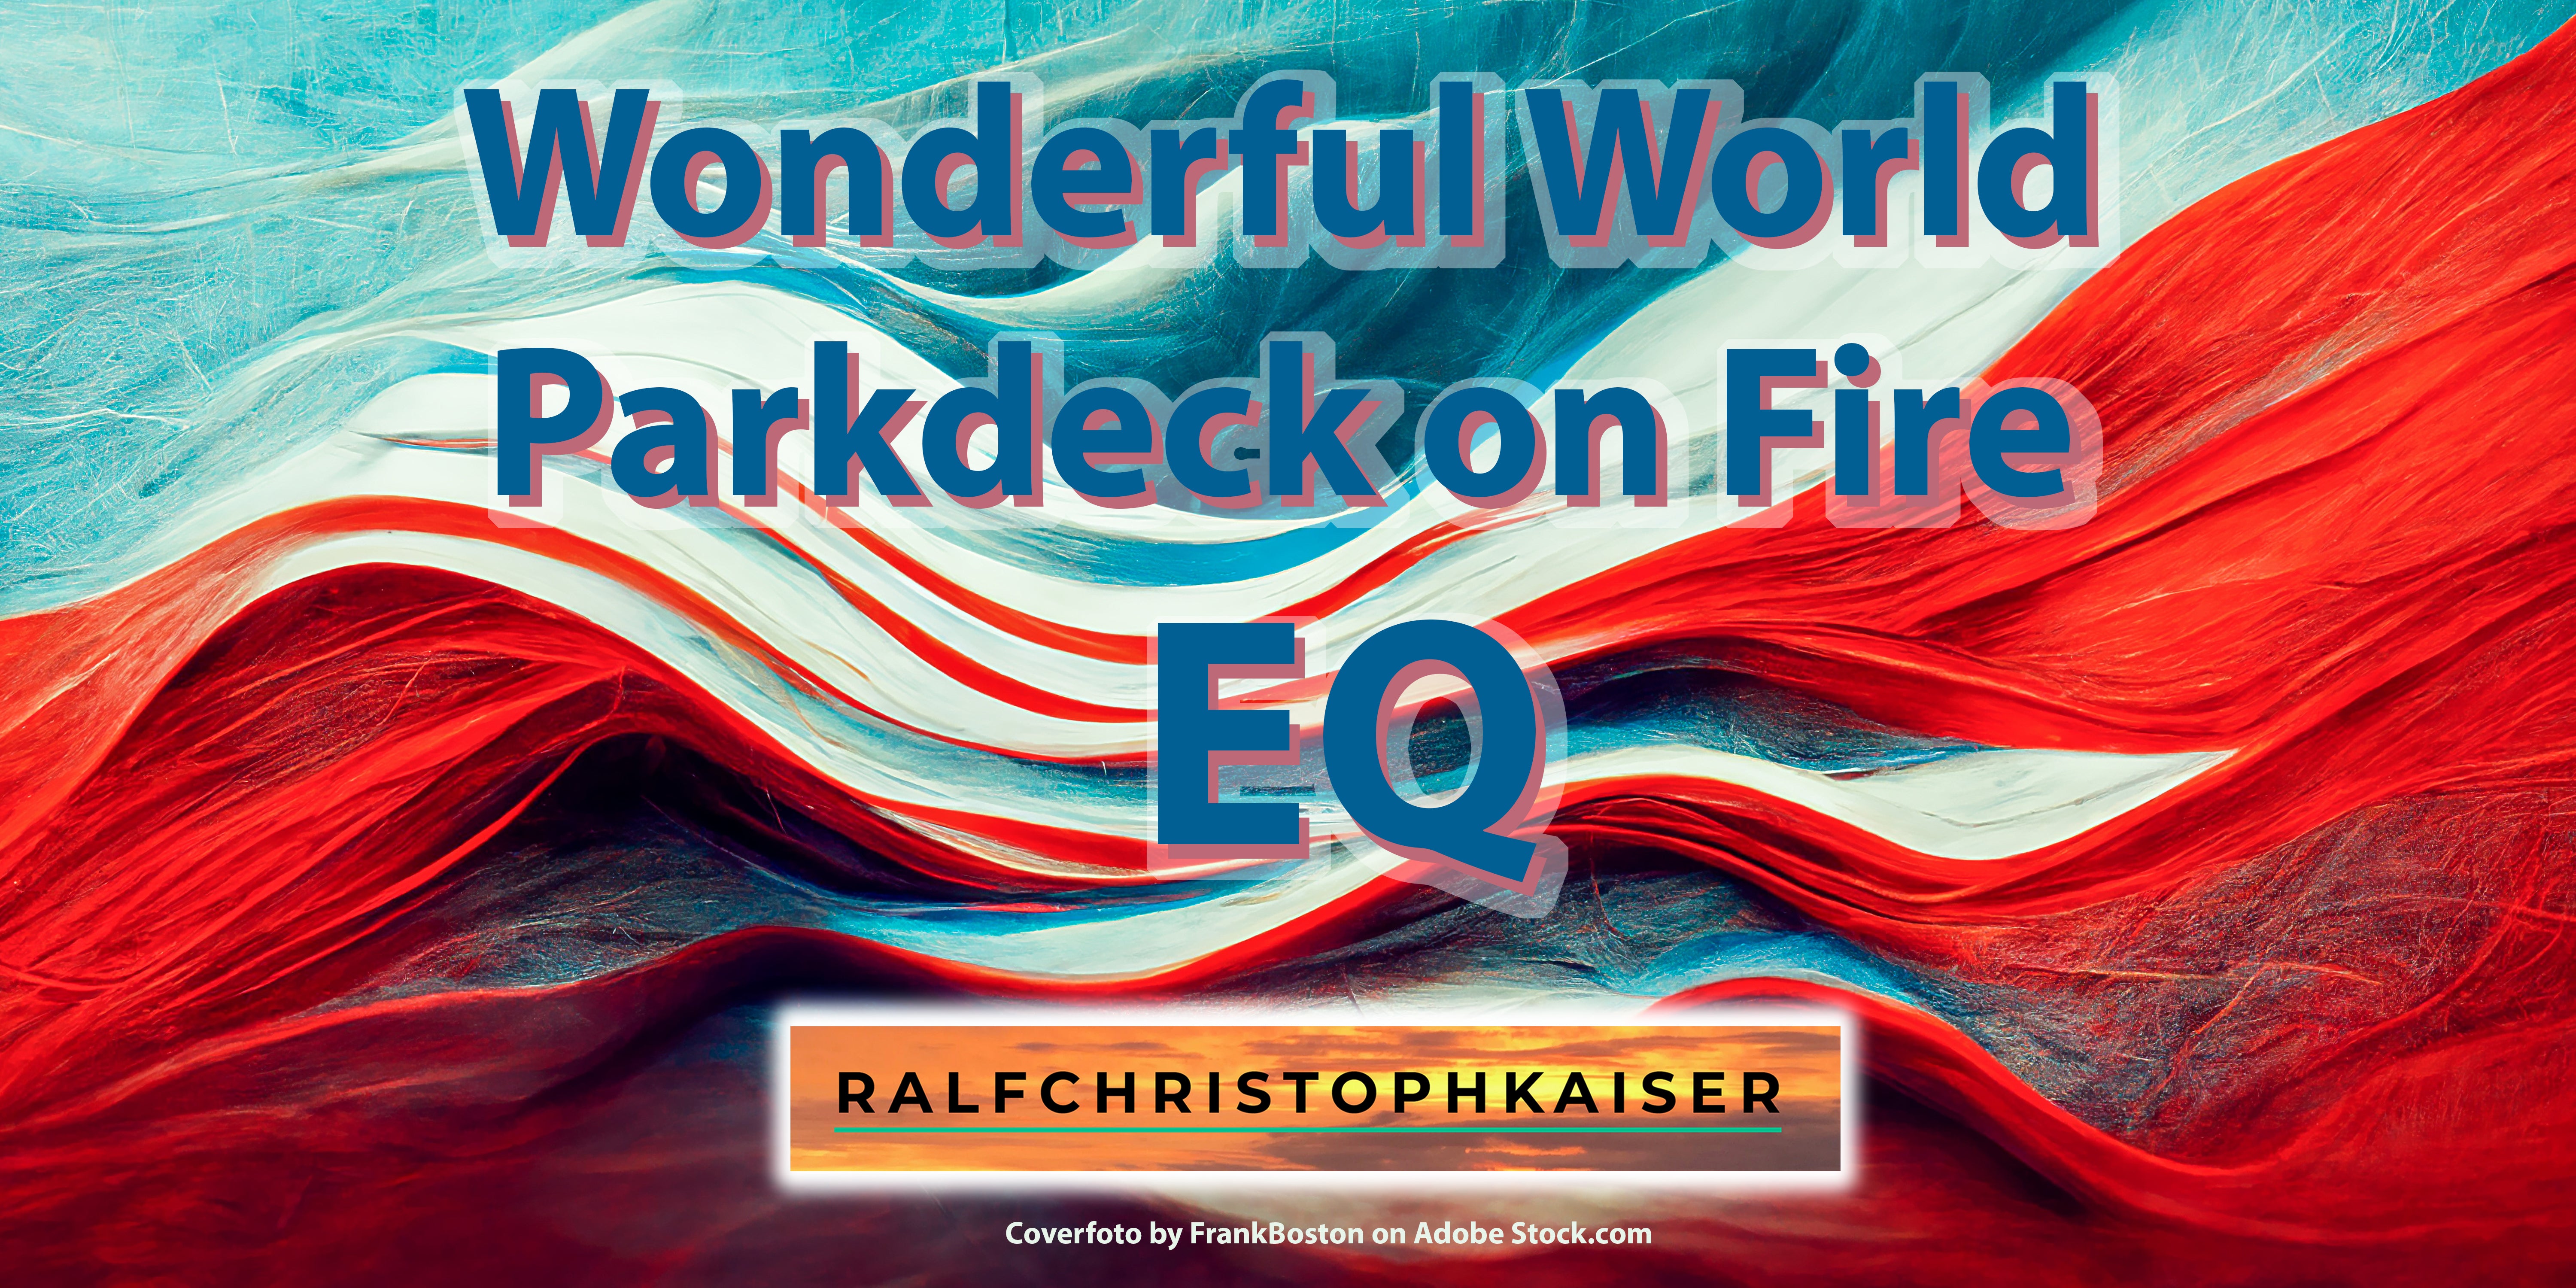 New electronica Hit Single Wonderful World - Parkdeck on Fire EQ by Ralf Christoph Kaiser and Monster Beat in Ultra HD Sound